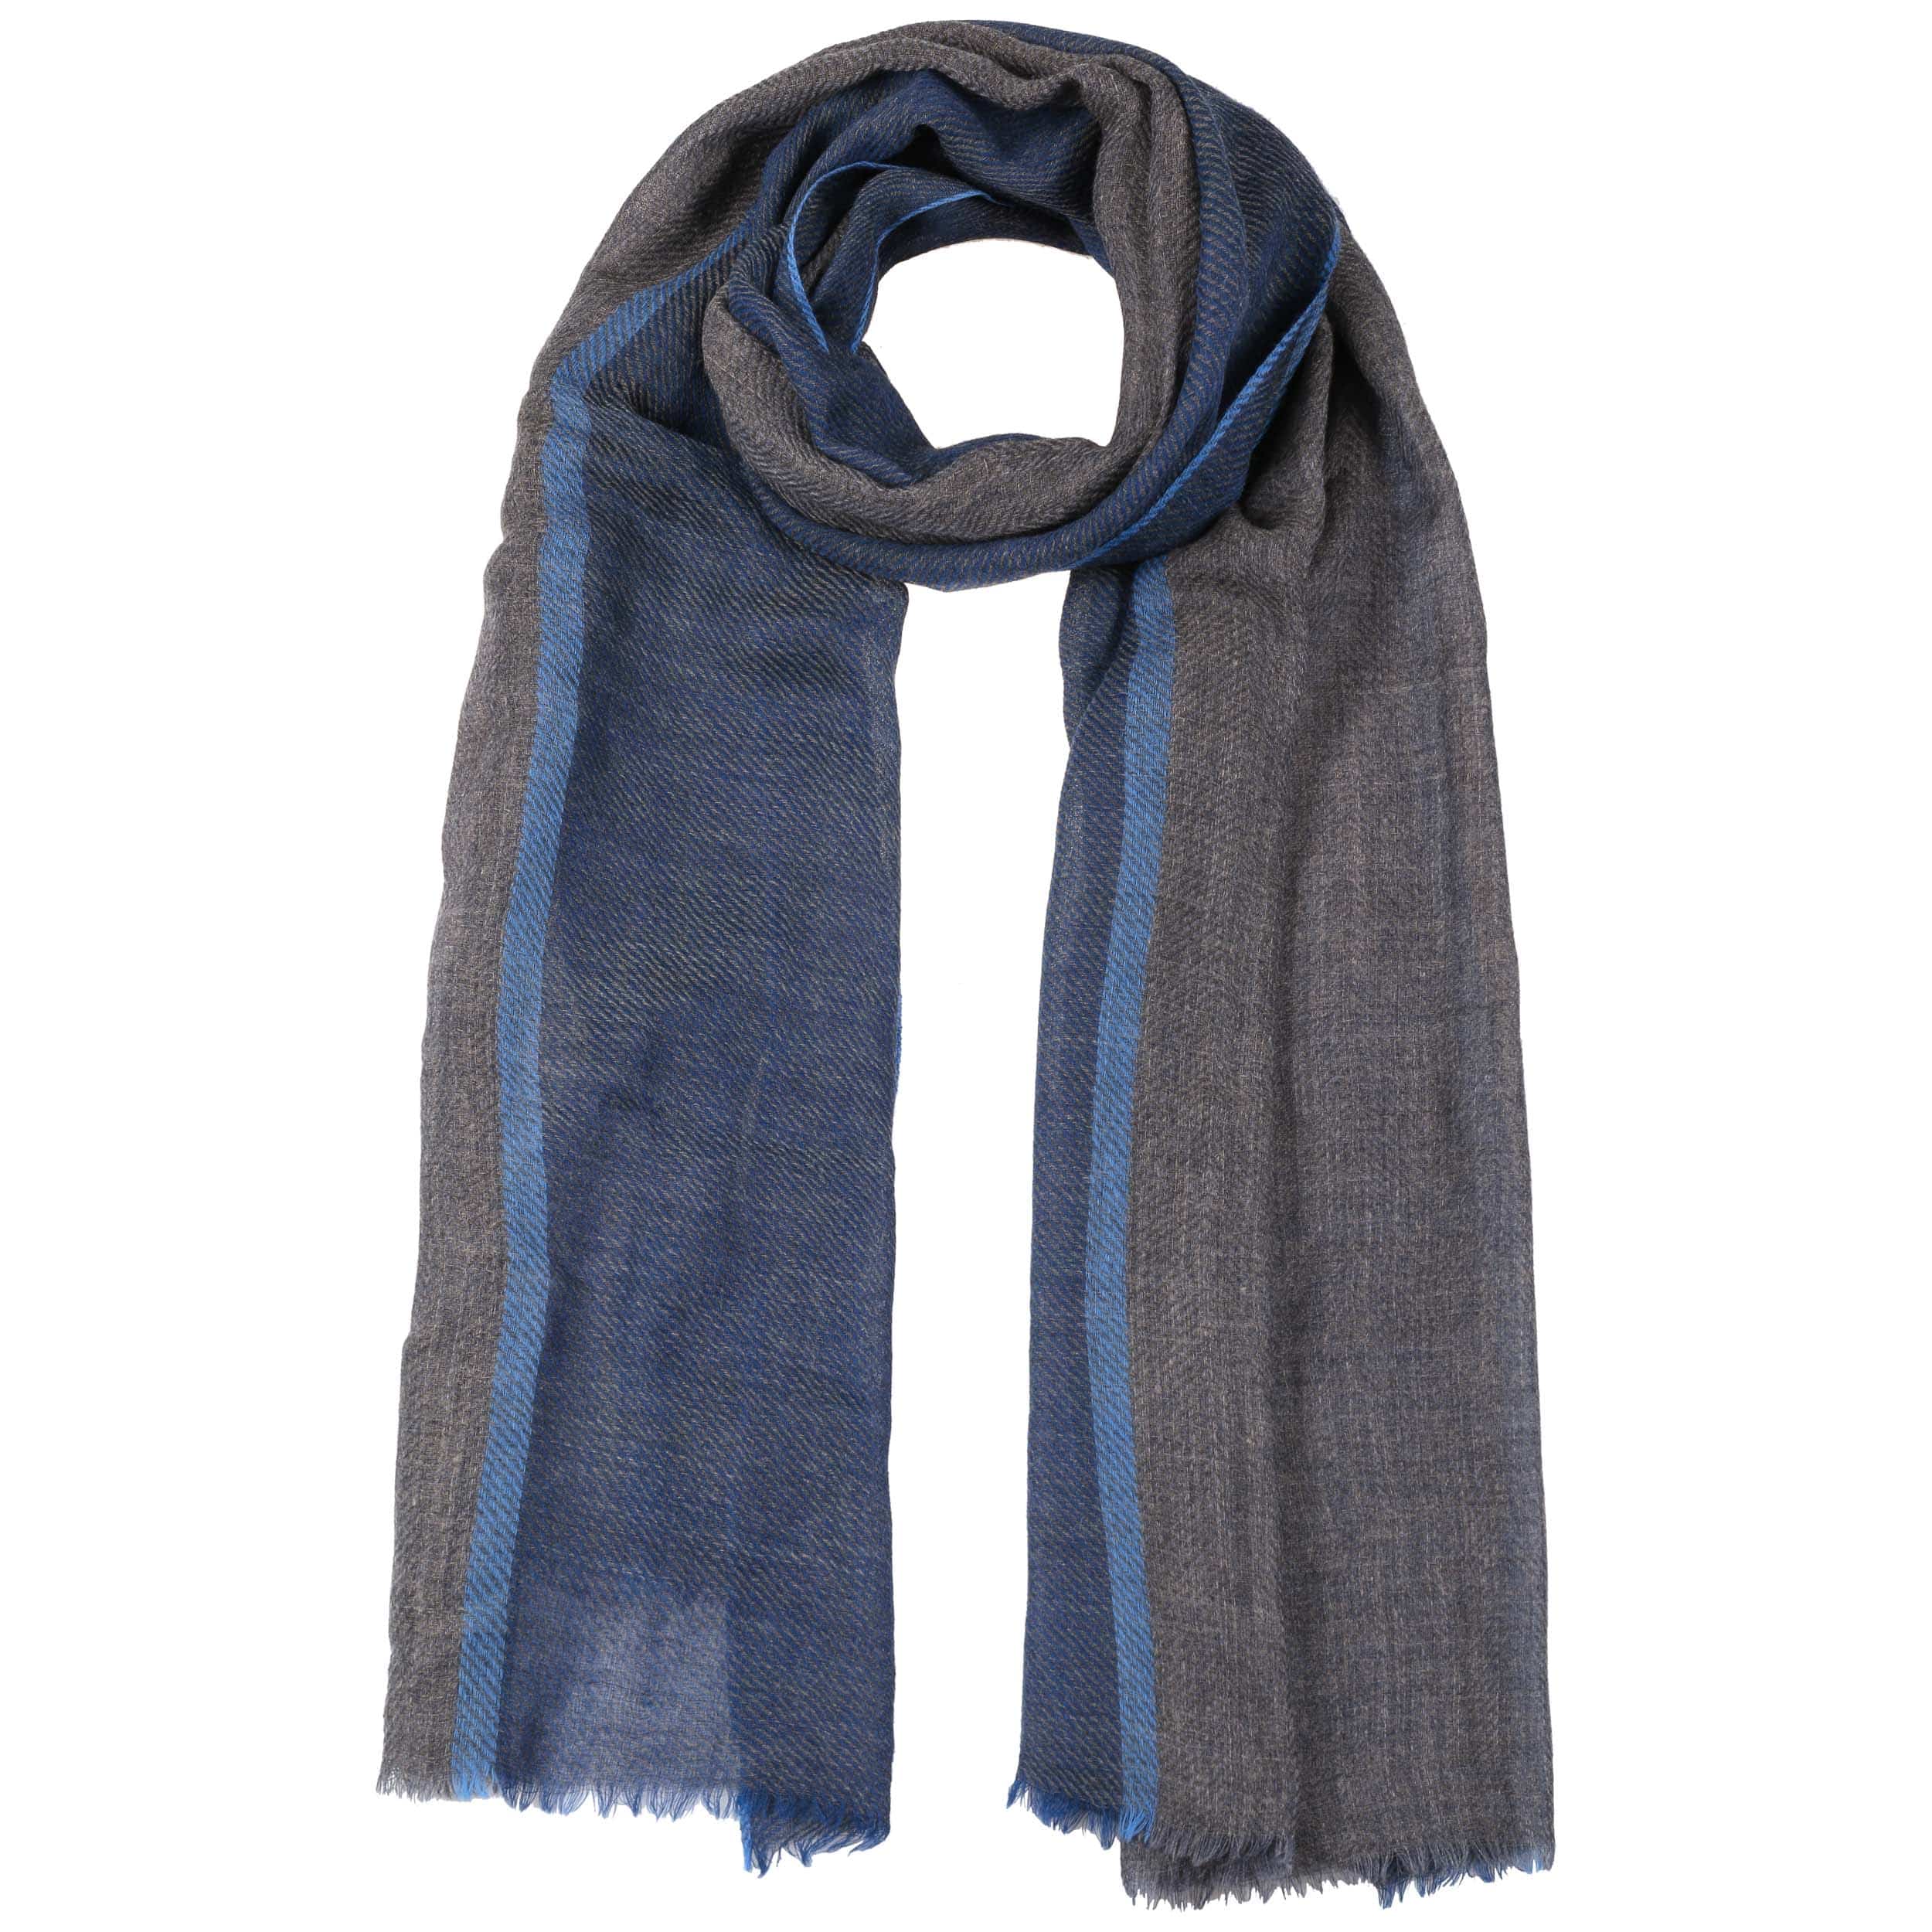 Tricolour Wool Scarf by Passigatti - 53,95